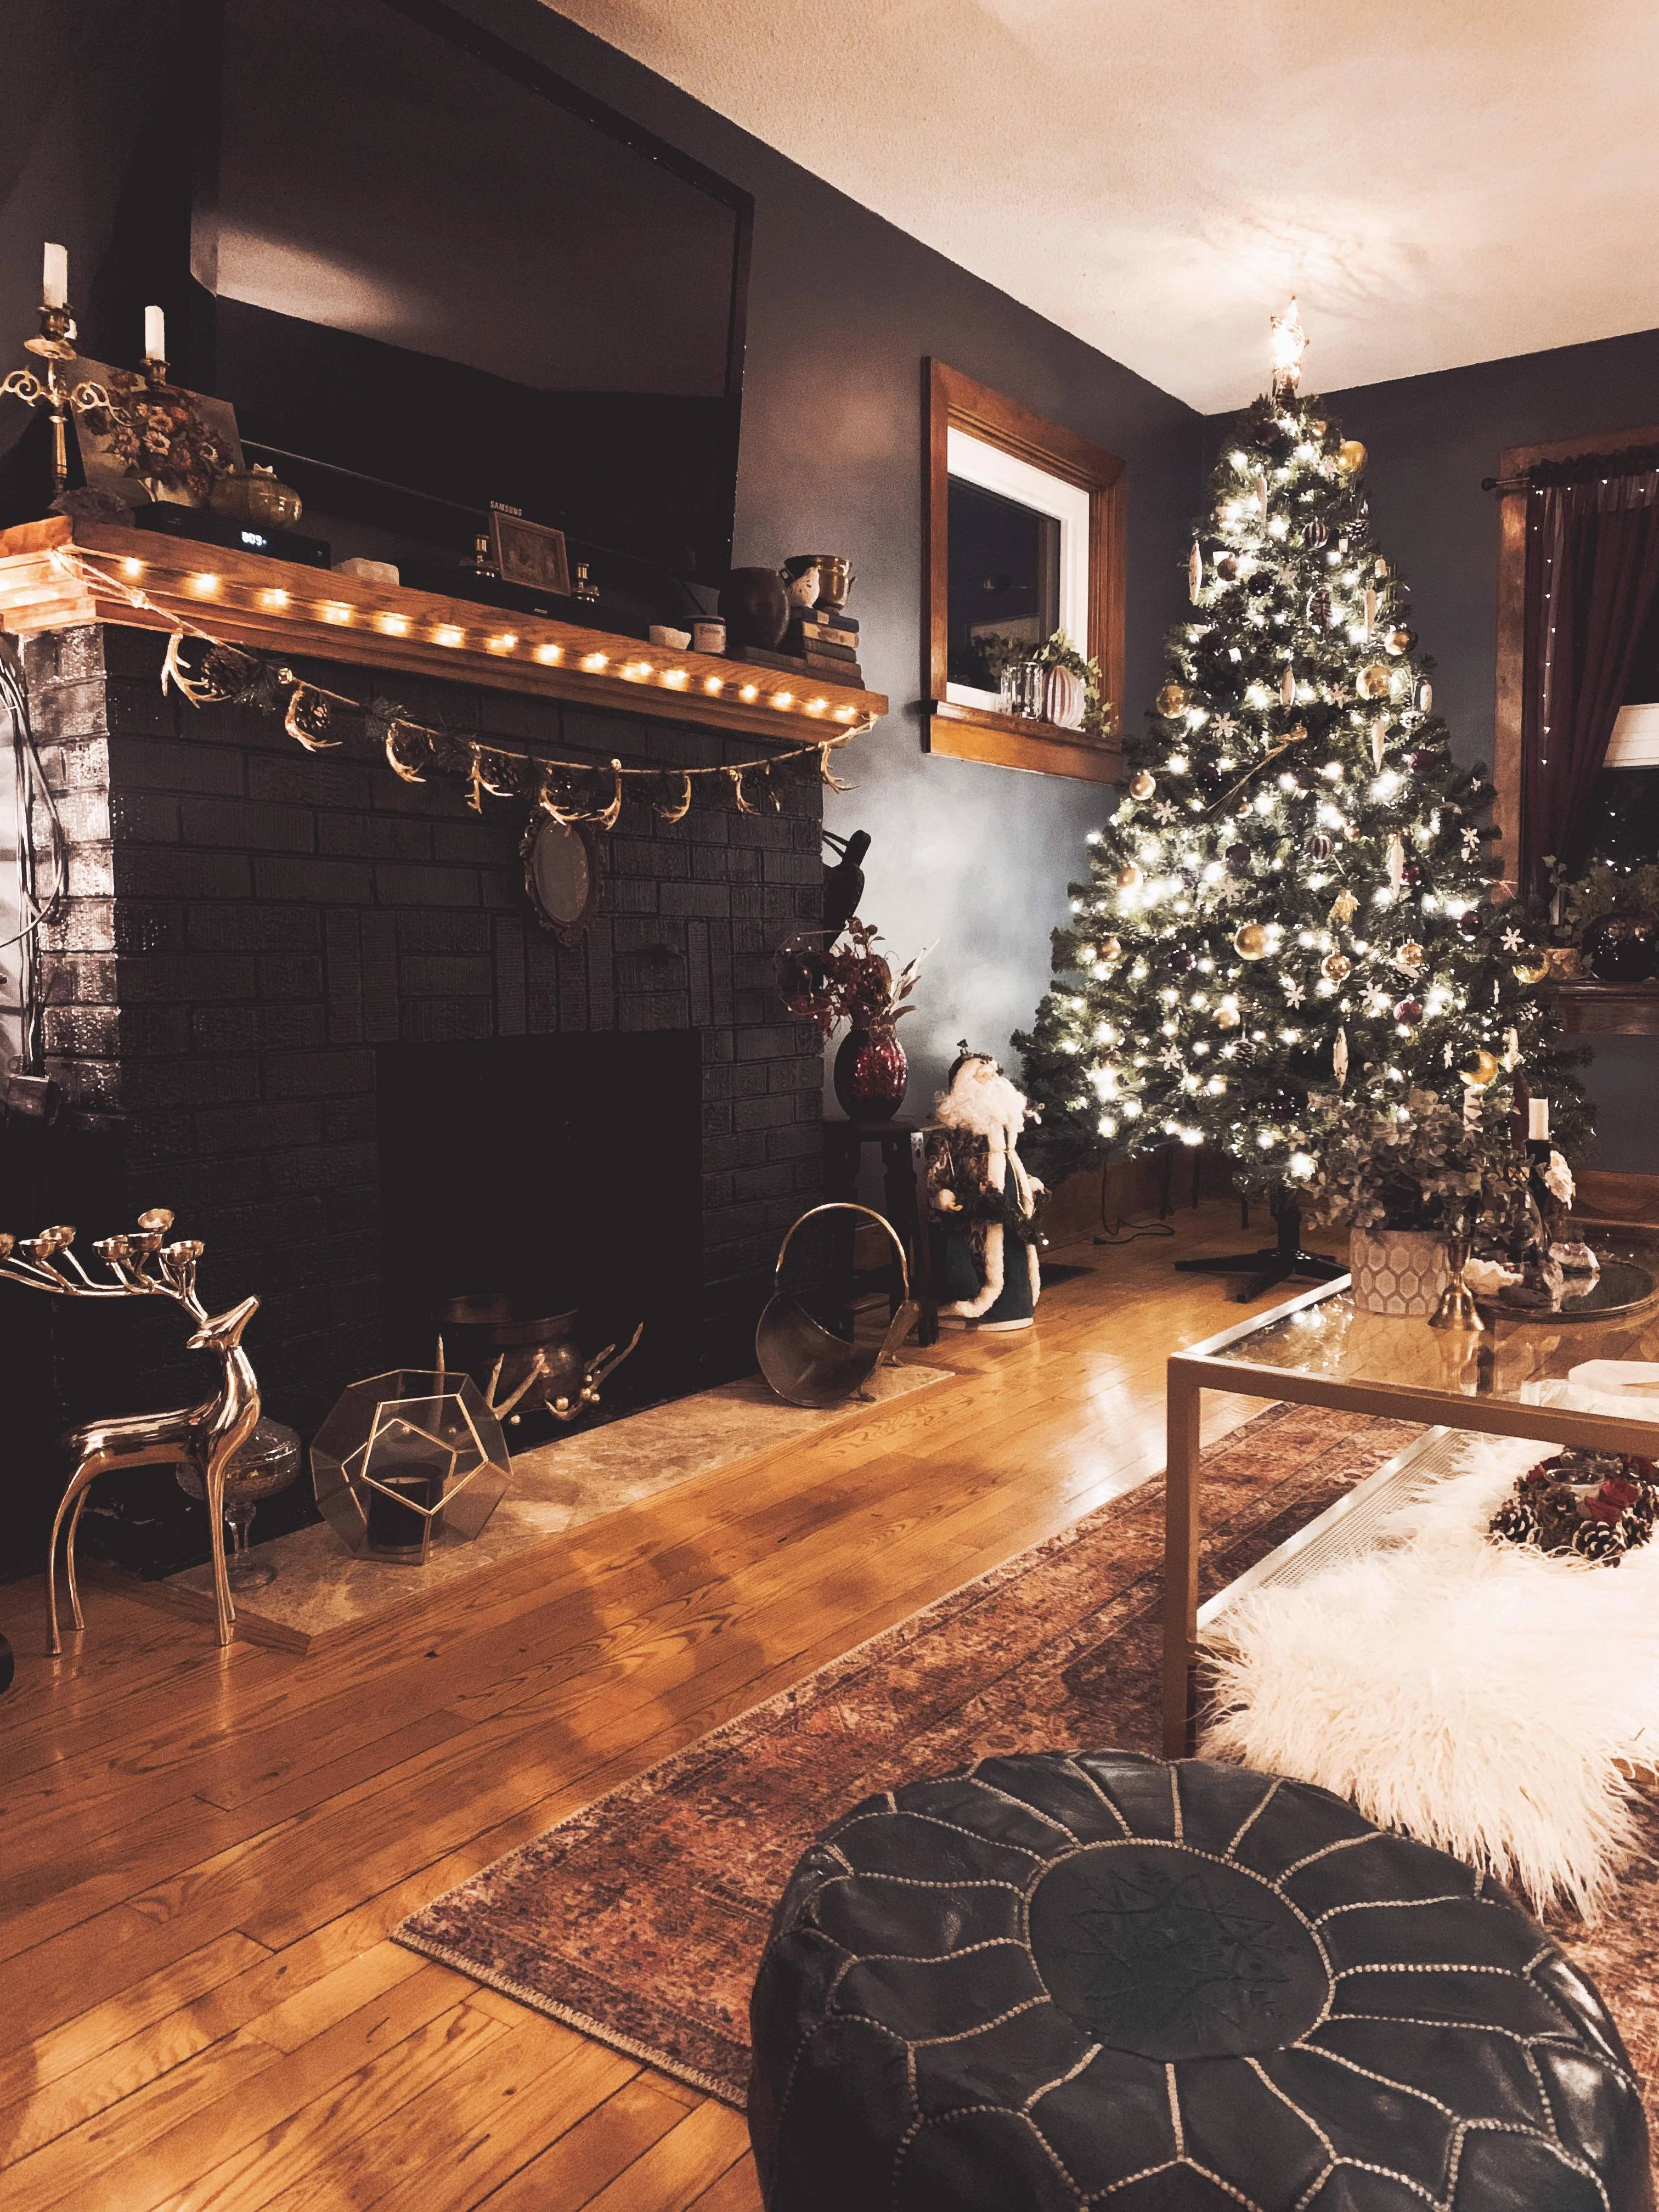 A christmas tree in the corner of this living room - Christmas